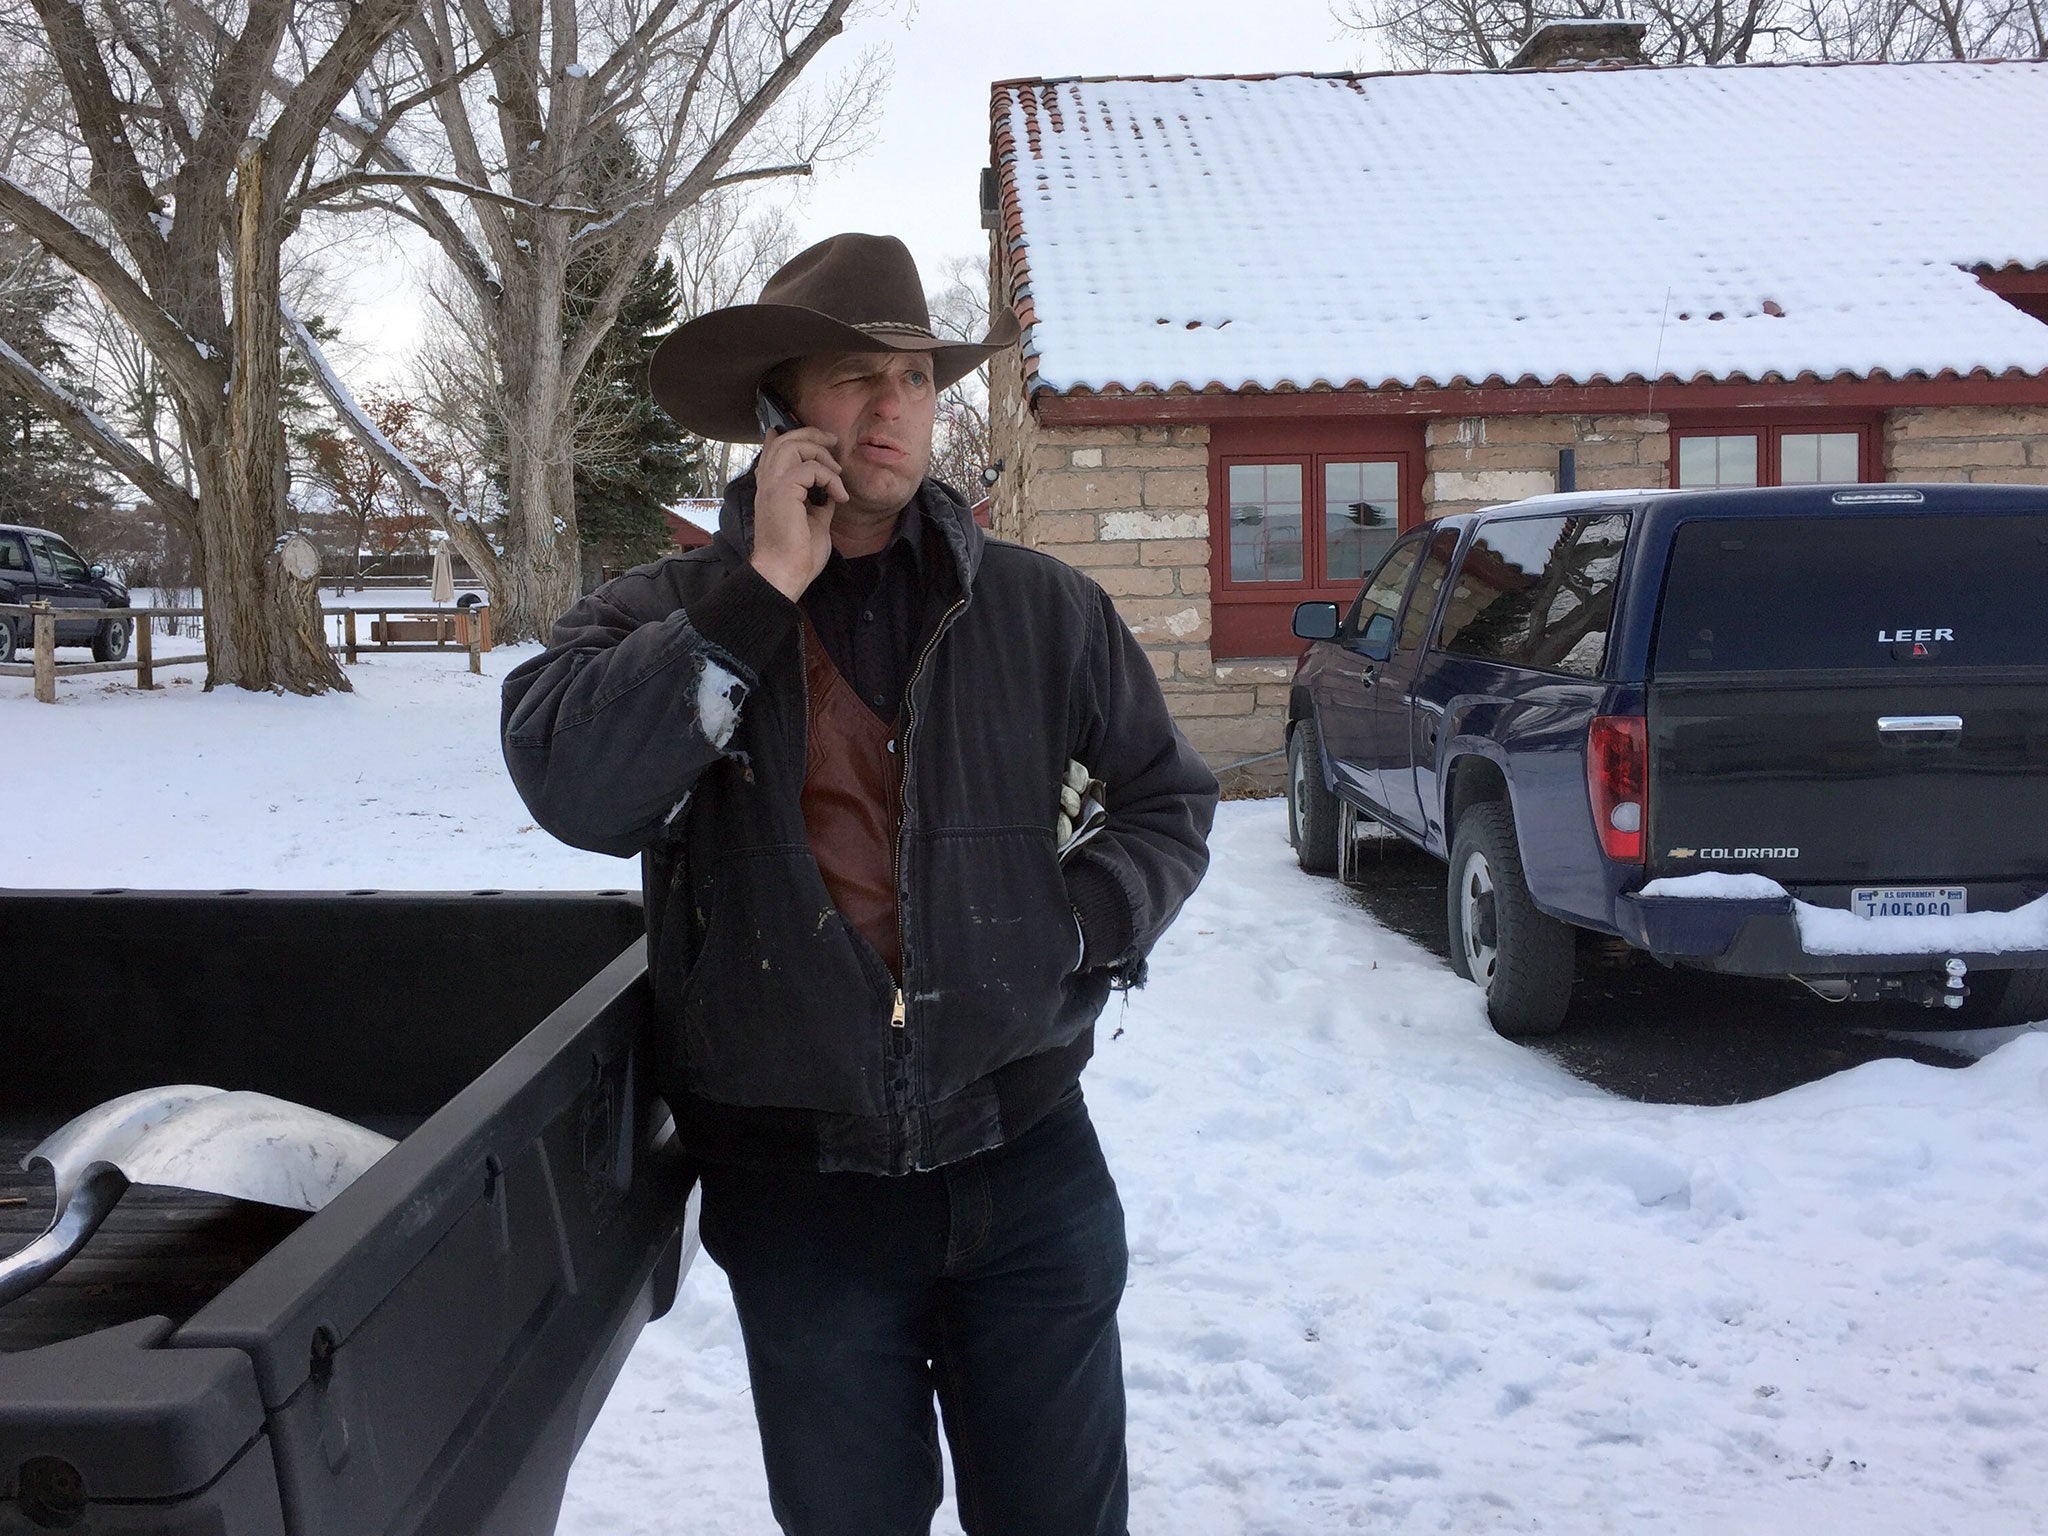 Ryan Bundy talks on the phone at the Malheur National Wildlife Refuge near Burns, Oregon. Bundy is one of the protesters occupying the refuge to object to a prison sentence for local ranchers for burning federal land